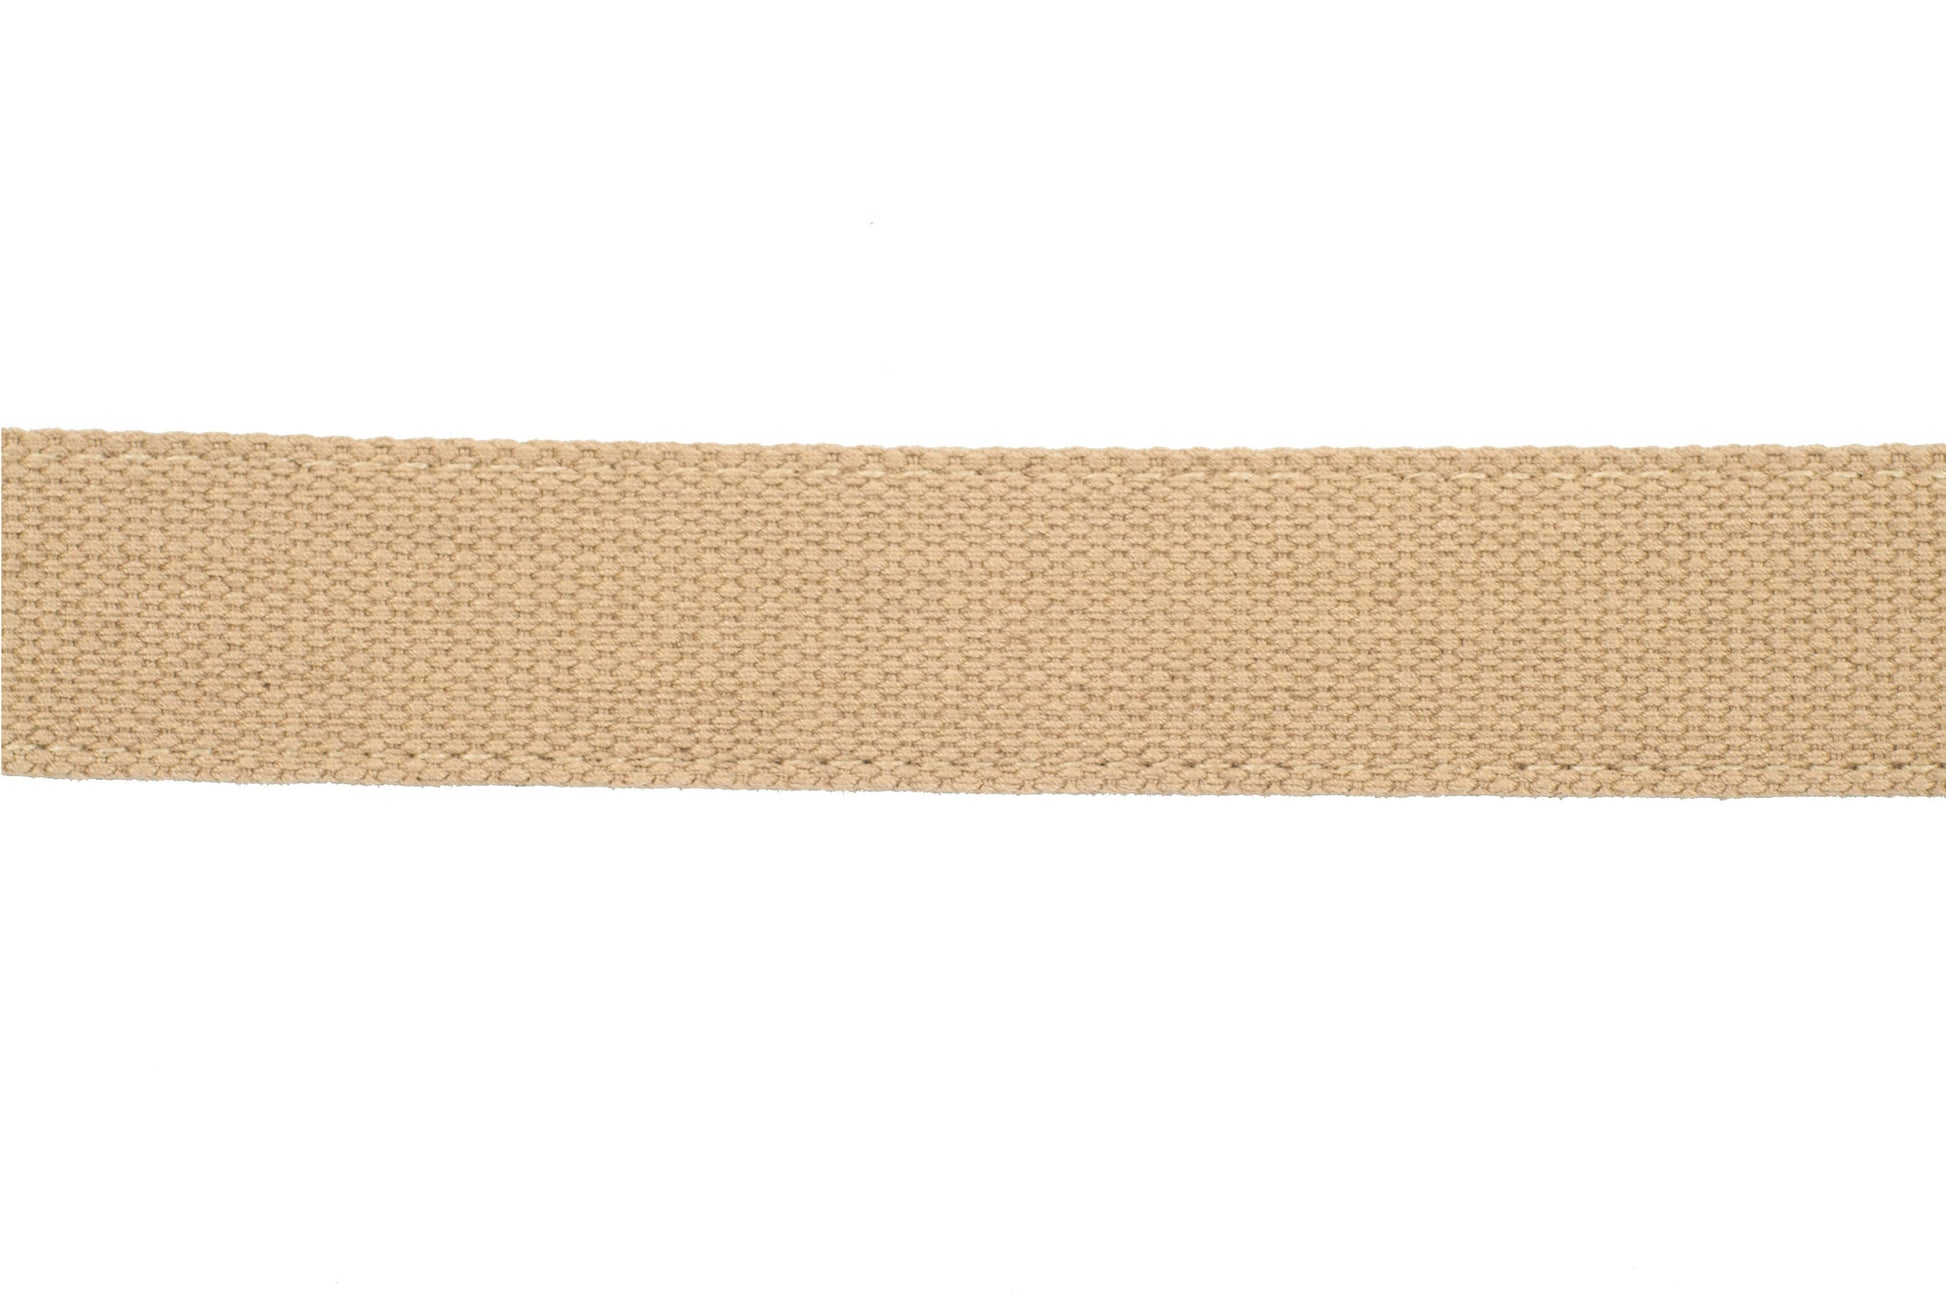 Men's canvas belt strap in khaki with a 1.25-inch width, casual look, close up view